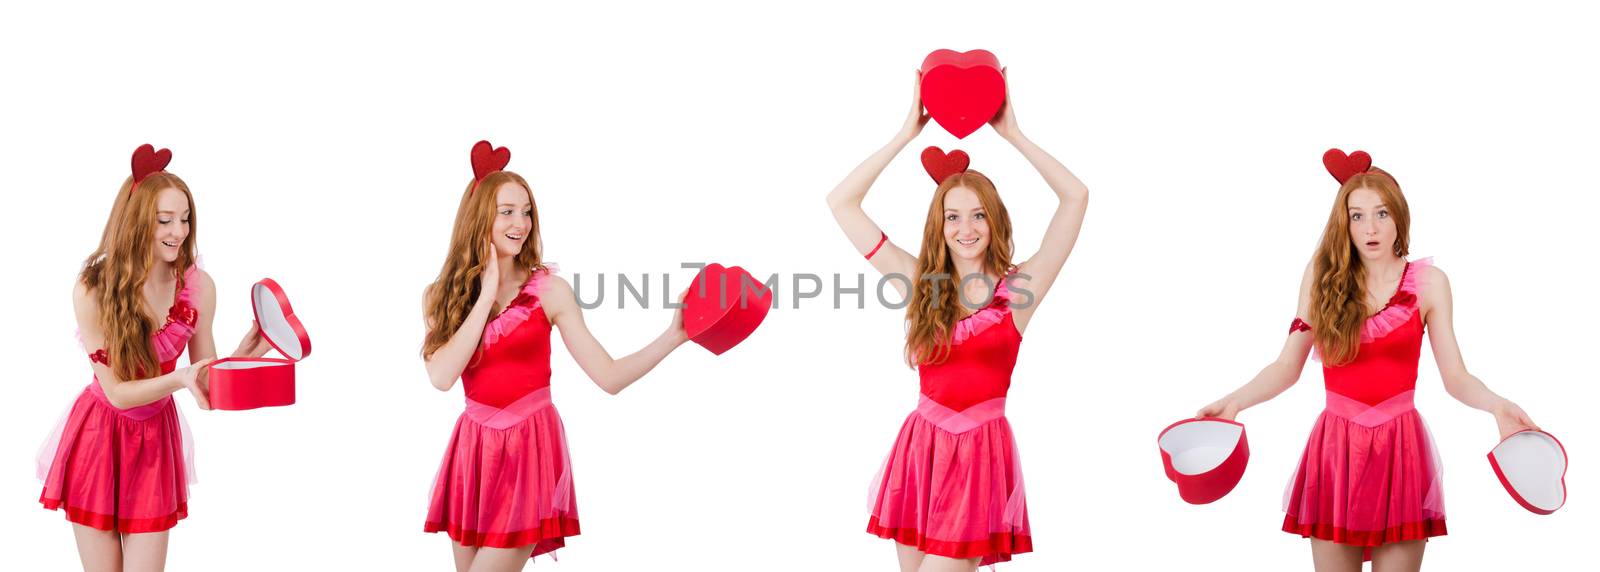 Pretty young model in mini pink dress holding gift box isolated on white